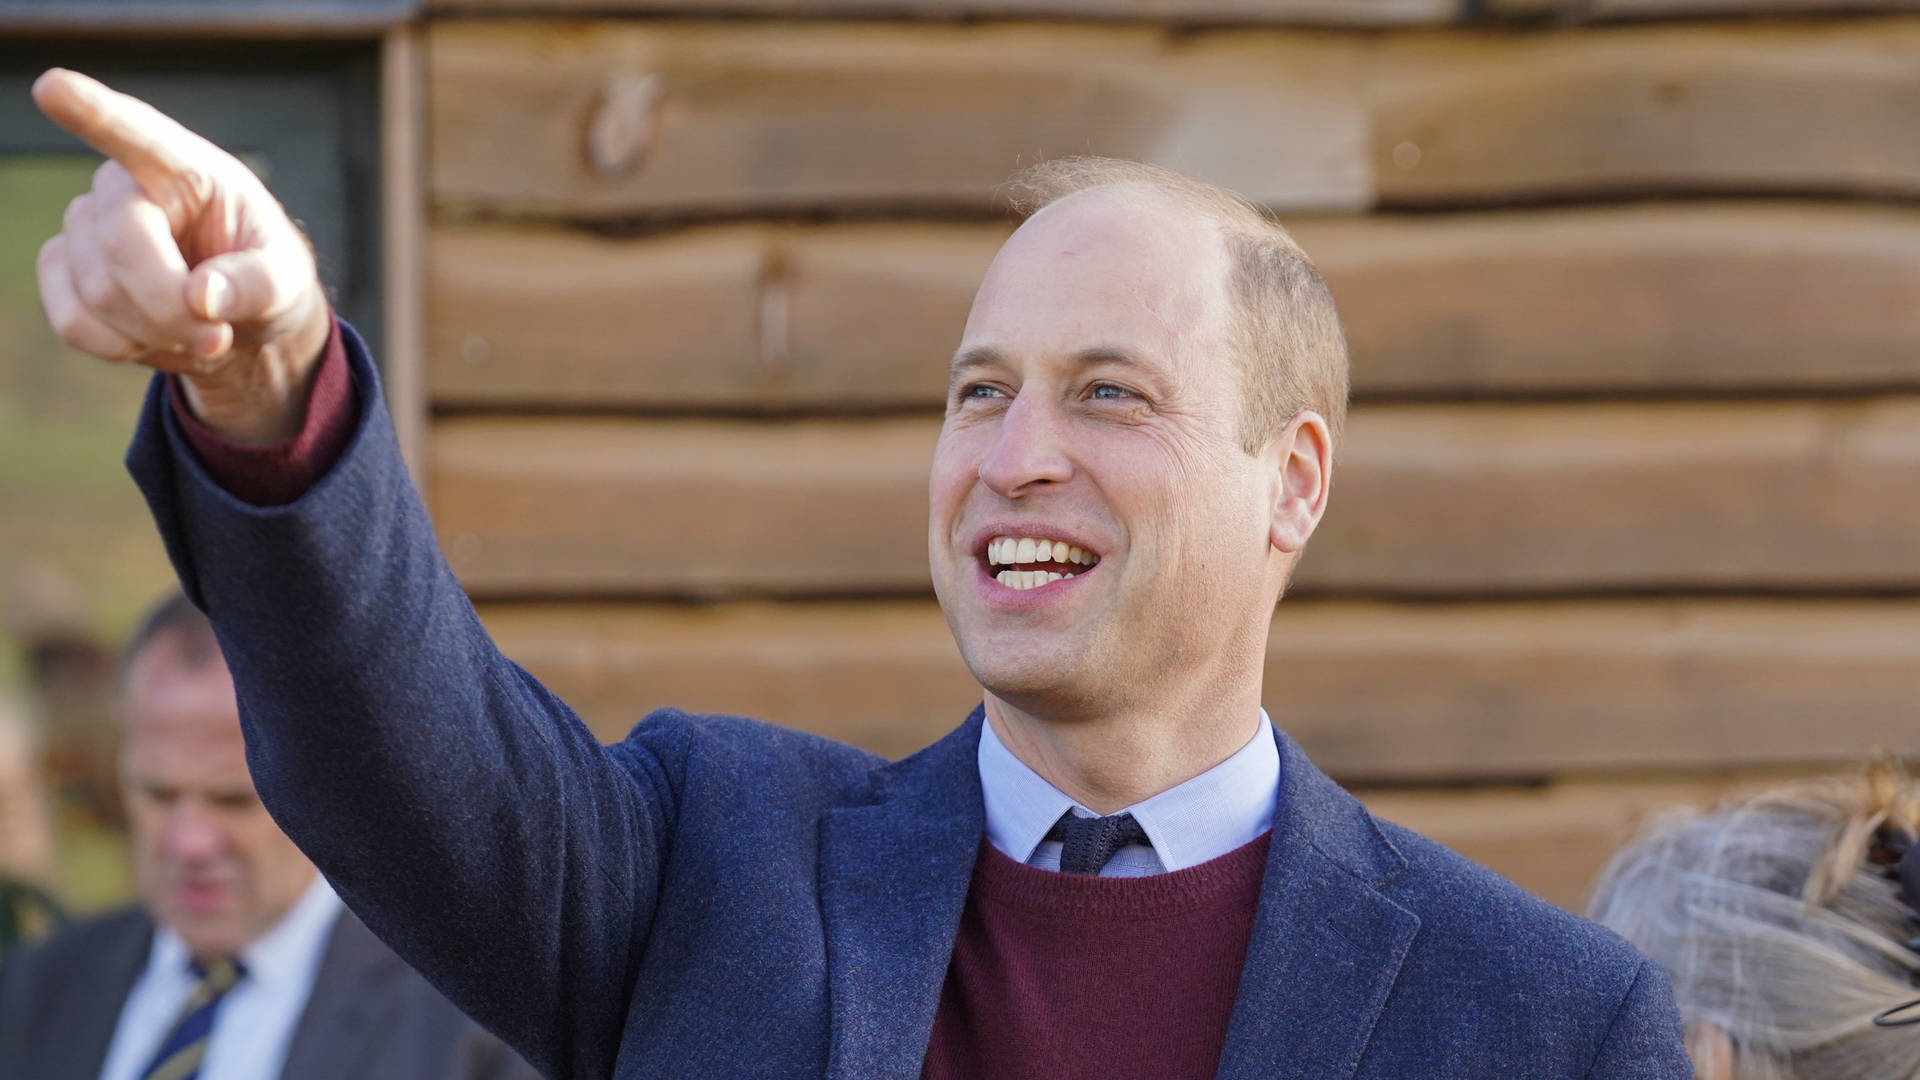 Prince William With A Cheerful Display Of Pointing And Smiling Background